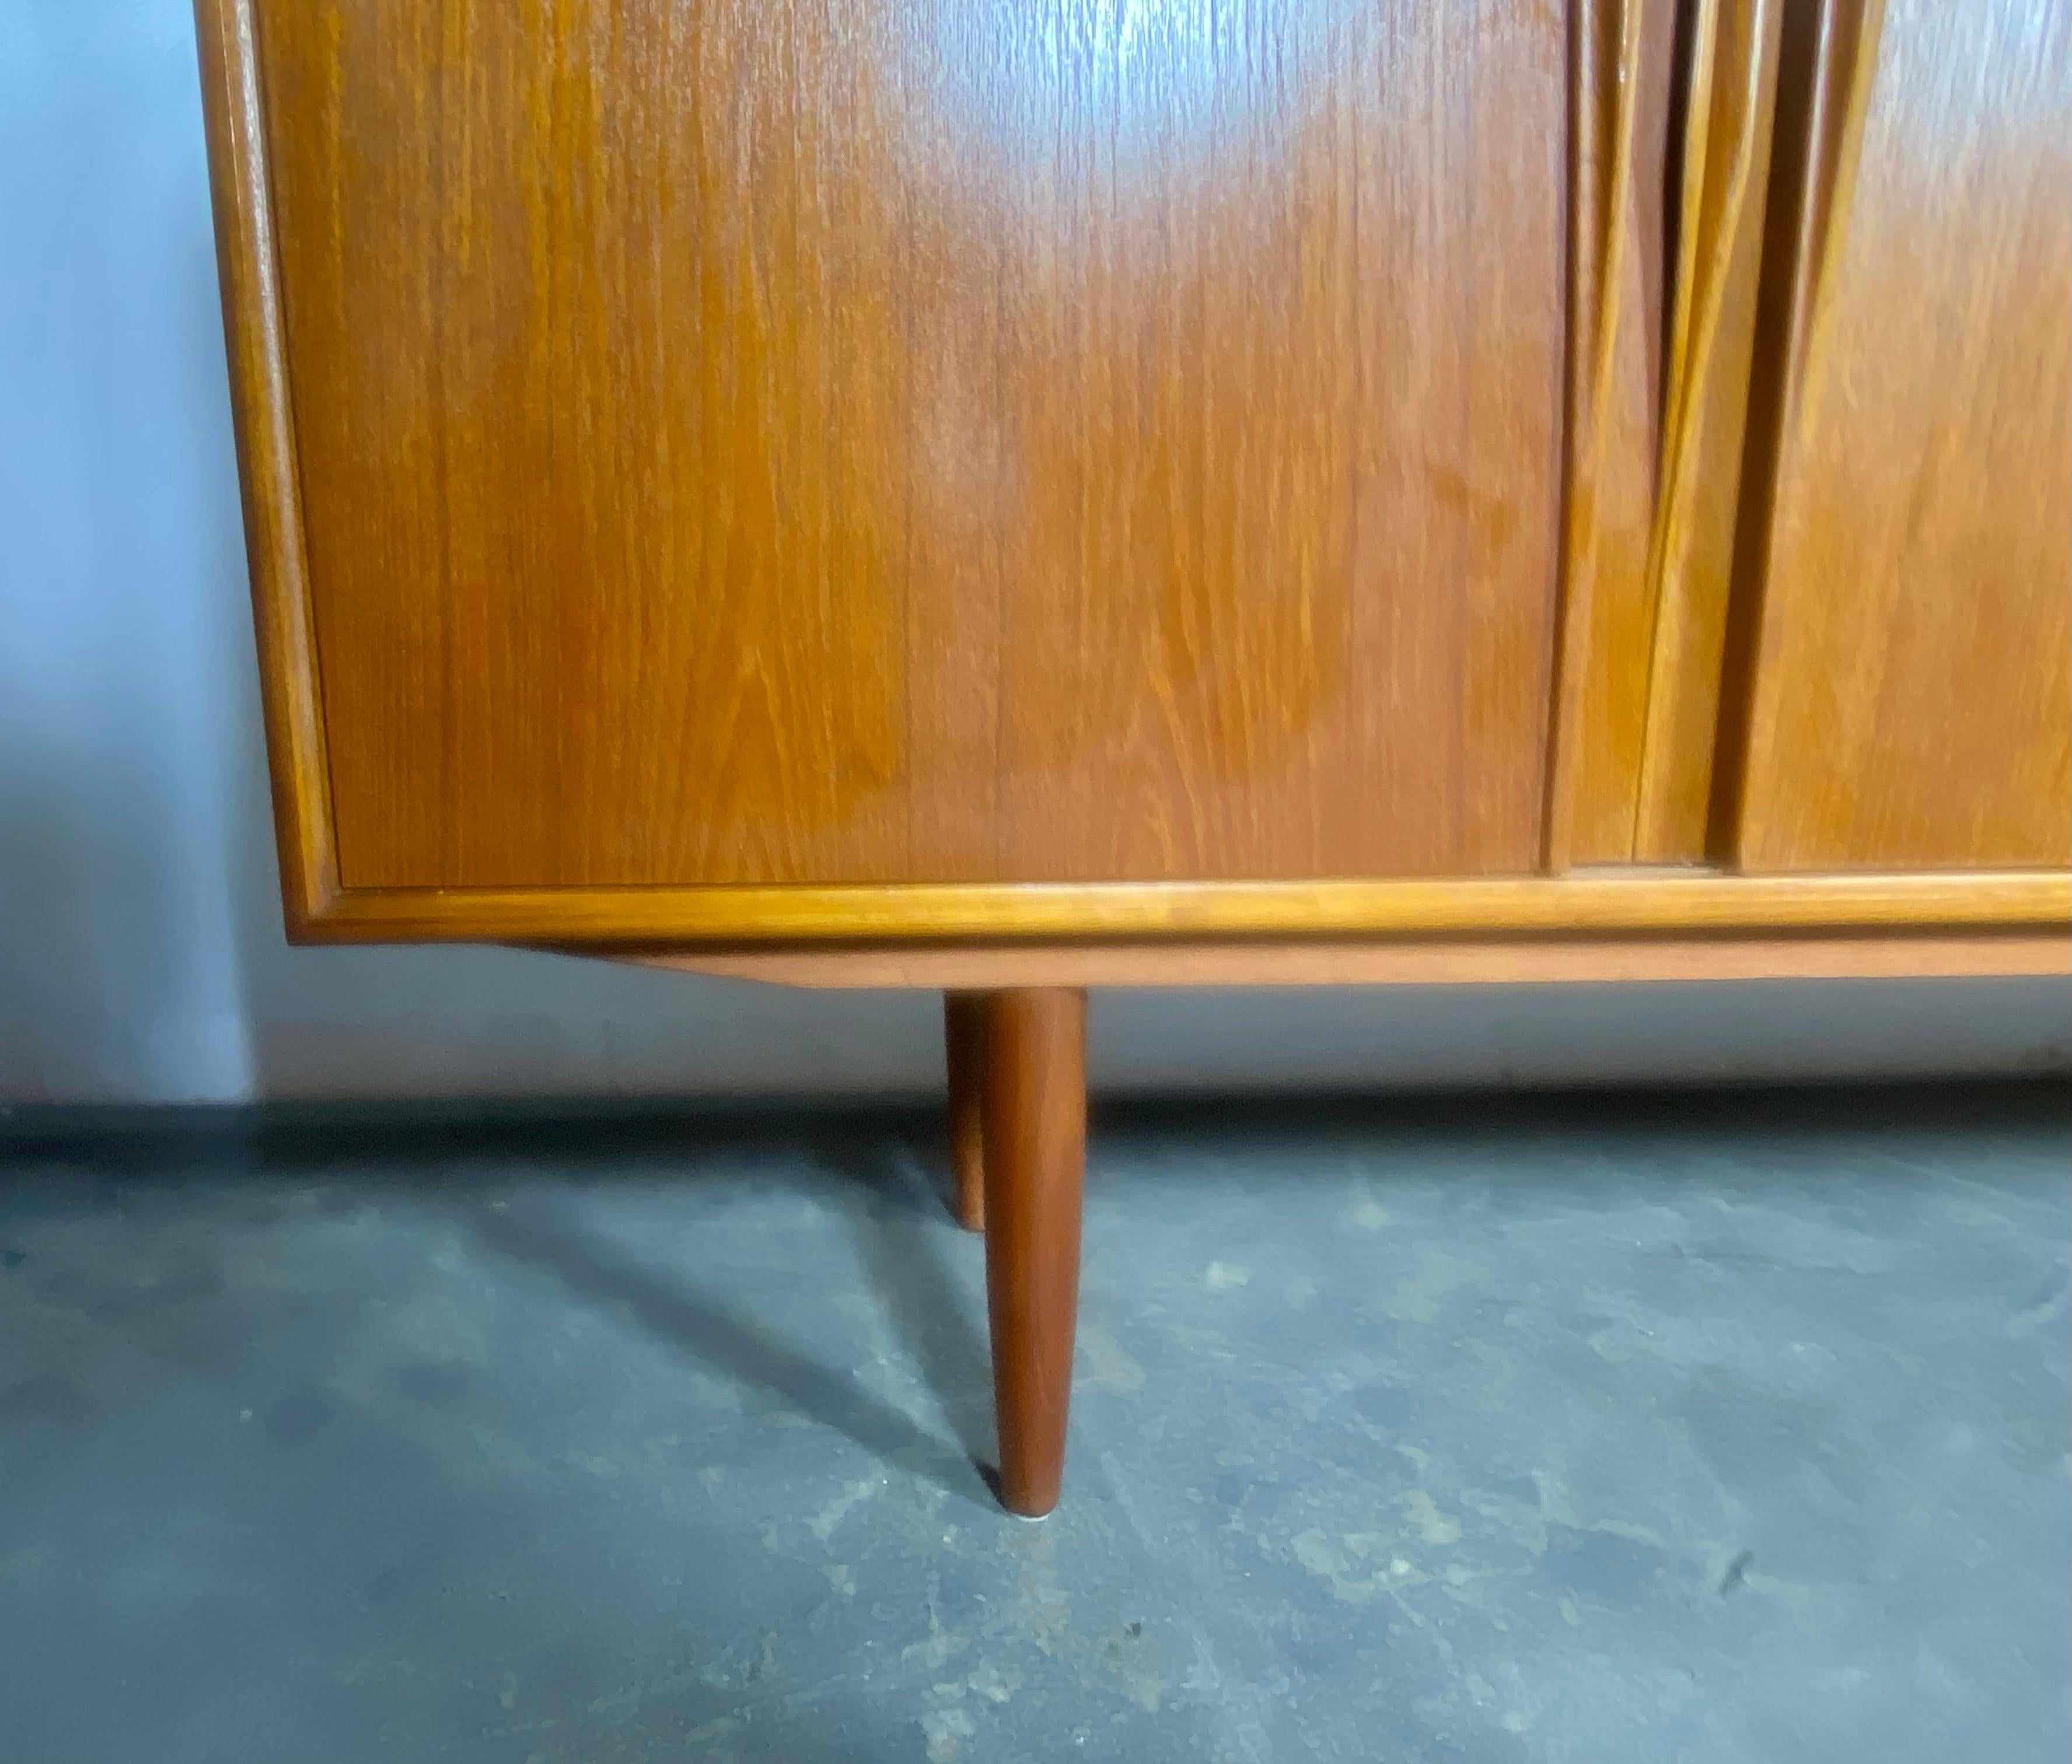 Large Danish Modern Teak Credenza by Axel Christensen Odder In Good Condition For Sale In Buffalo, NY